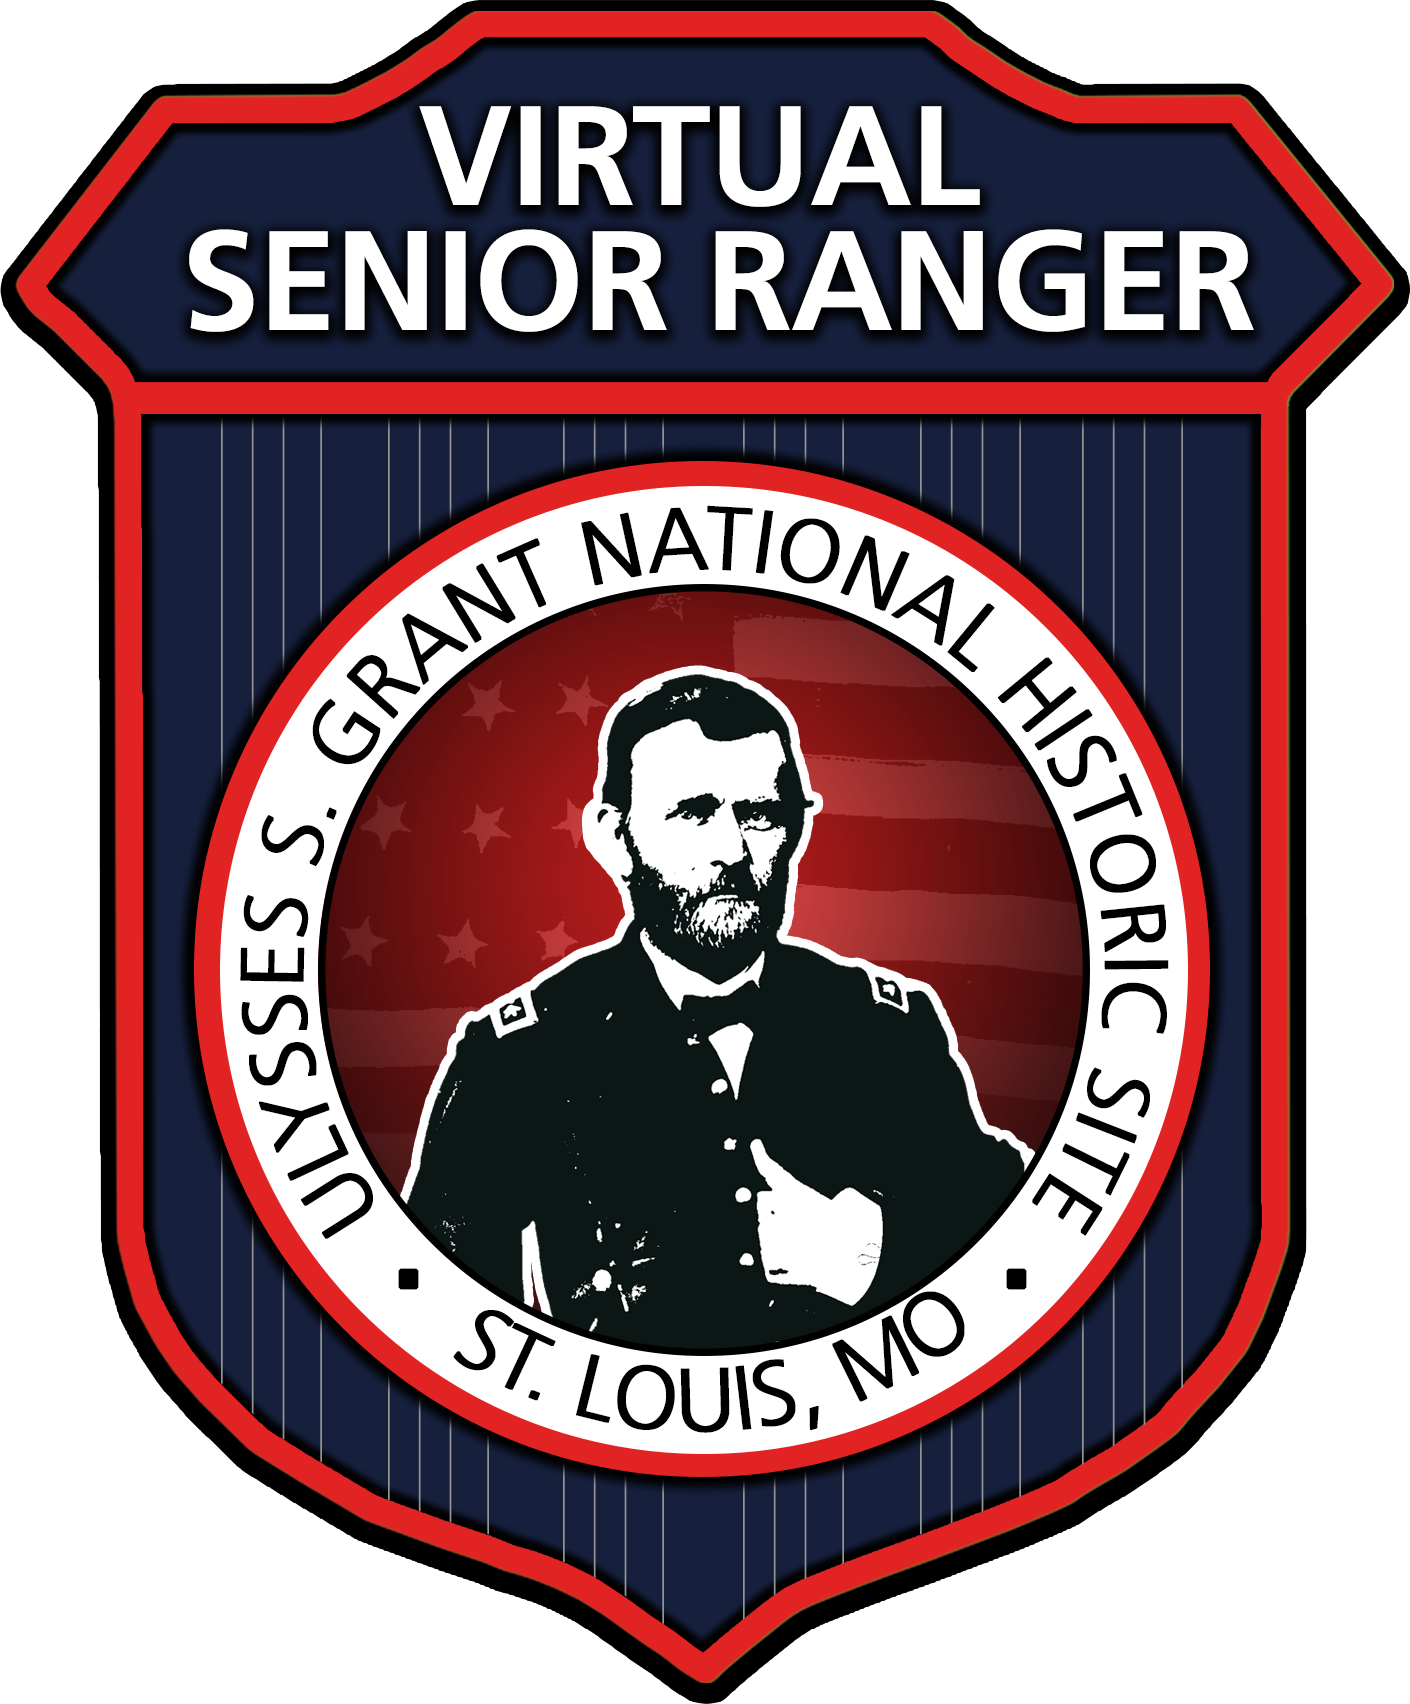 Red, white and blue virtual senior ranger badge with an image of Ulysses S. Grant